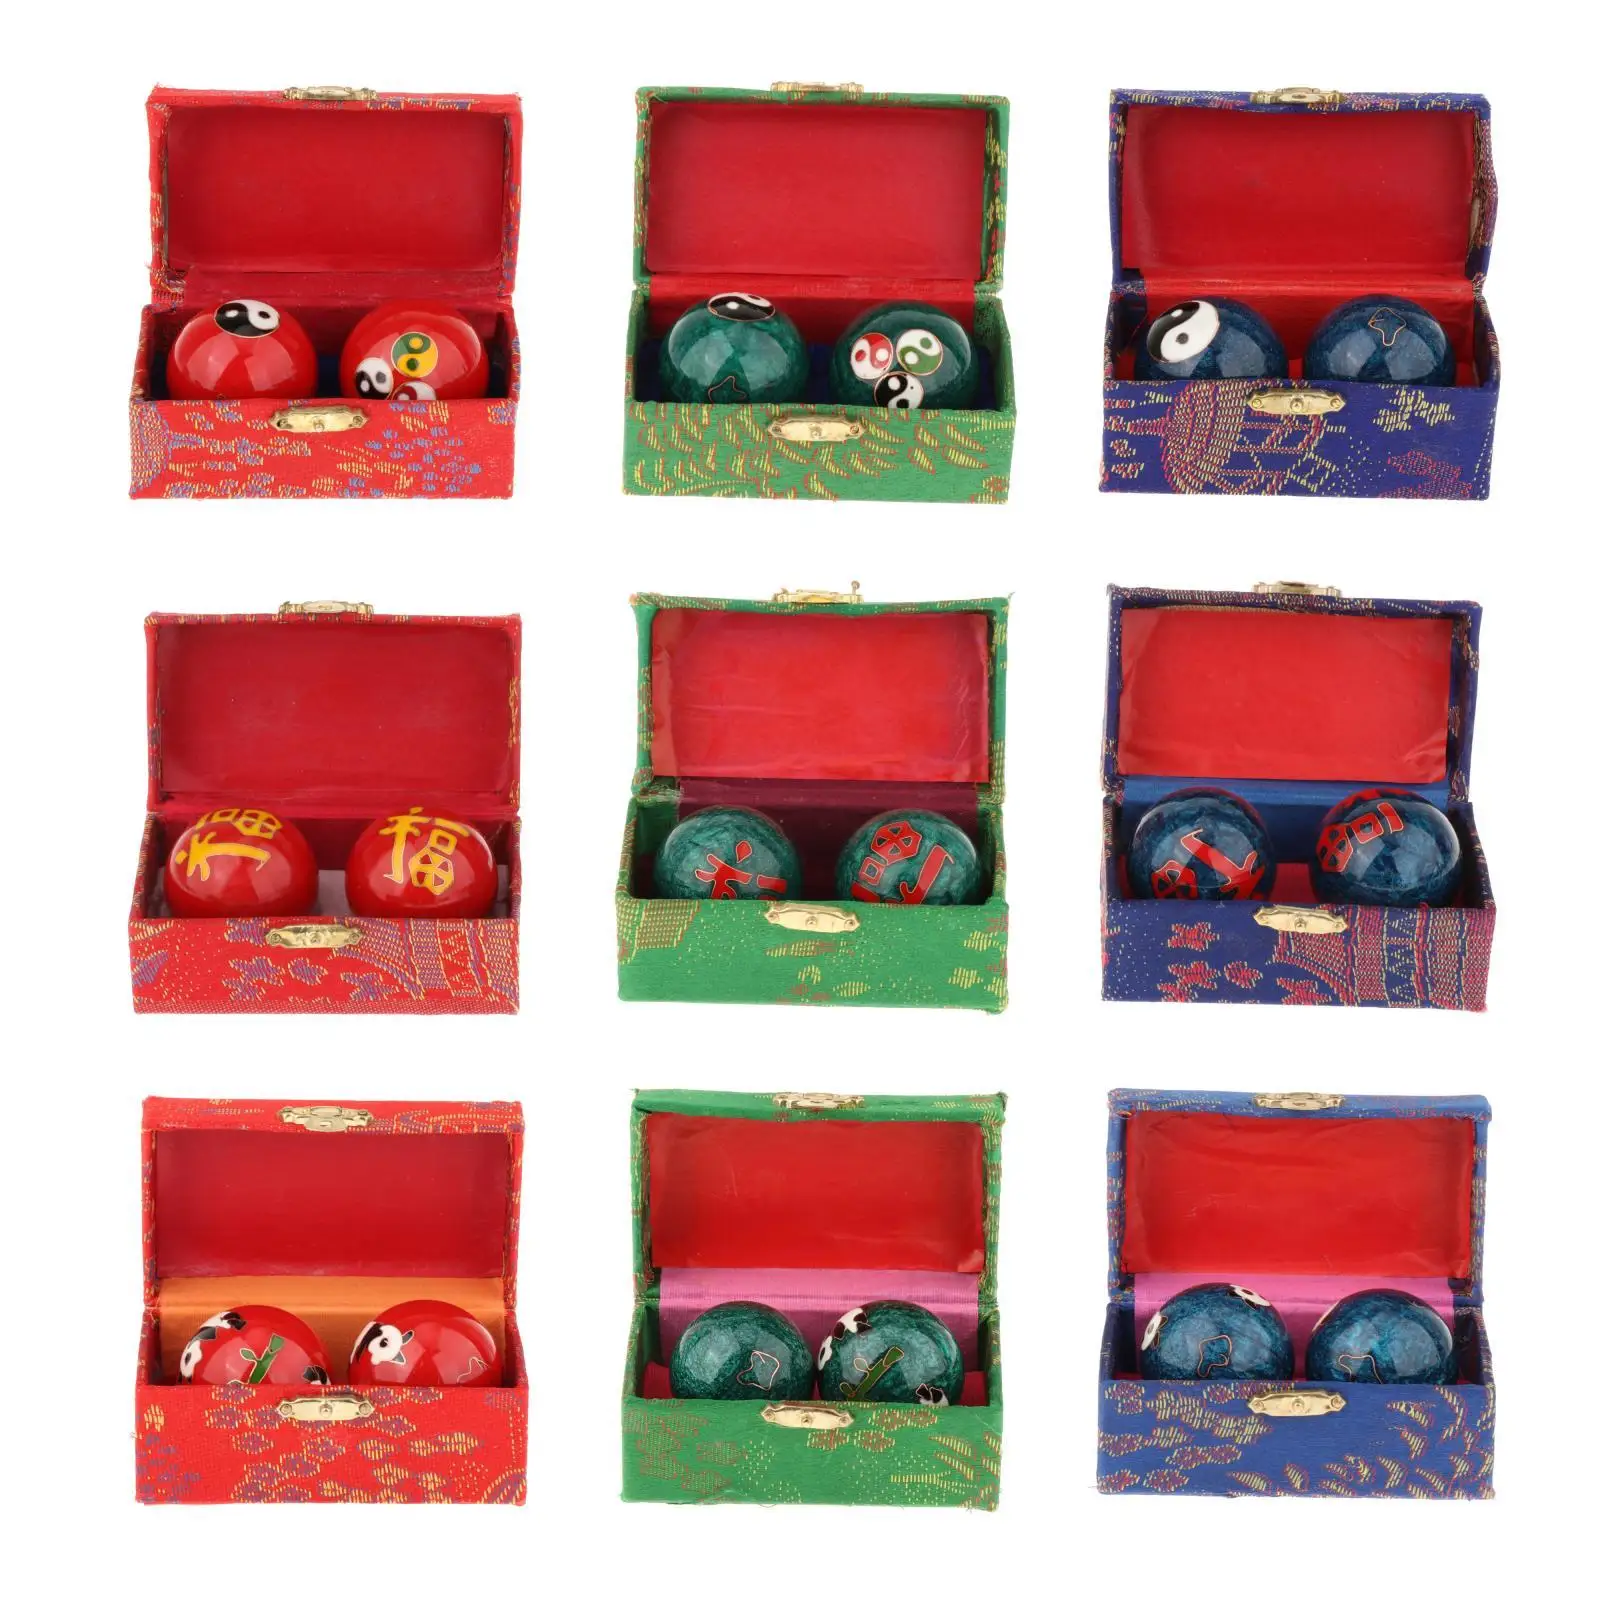 2Pcs Hand Massage Balls with Storage Box for Kids Parents Middle Aged People